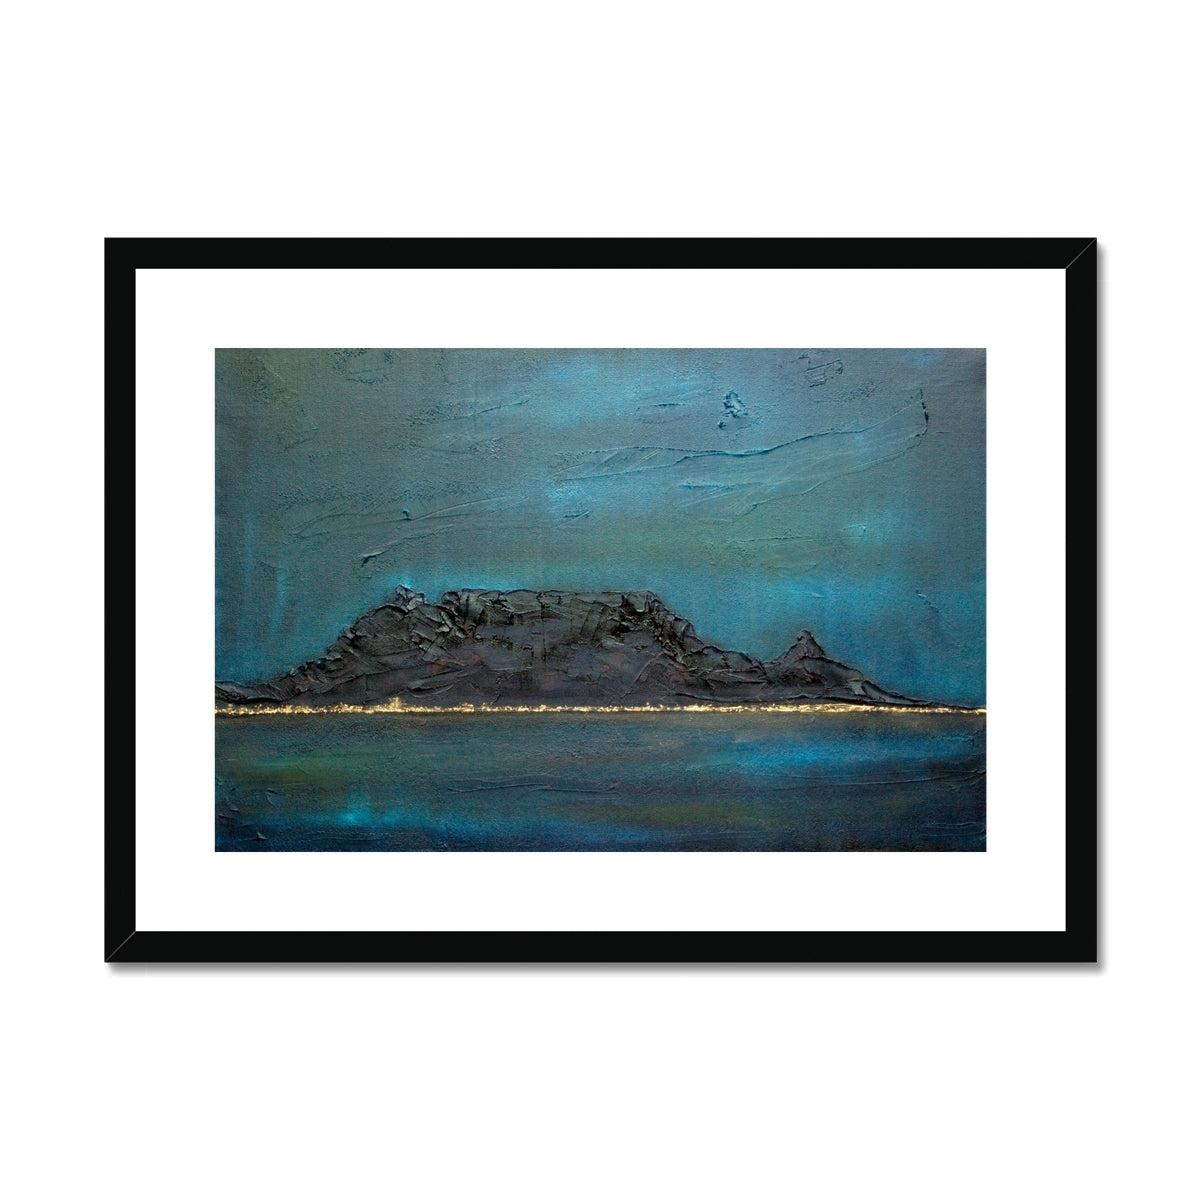 Table Mountain Dusk Painting | Framed & Mounted Prints From Scotland-Framed & Mounted Prints-World Art Gallery-A2 Landscape-Black Frame-Paintings, Prints, Homeware, Art Gifts From Scotland By Scottish Artist Kevin Hunter